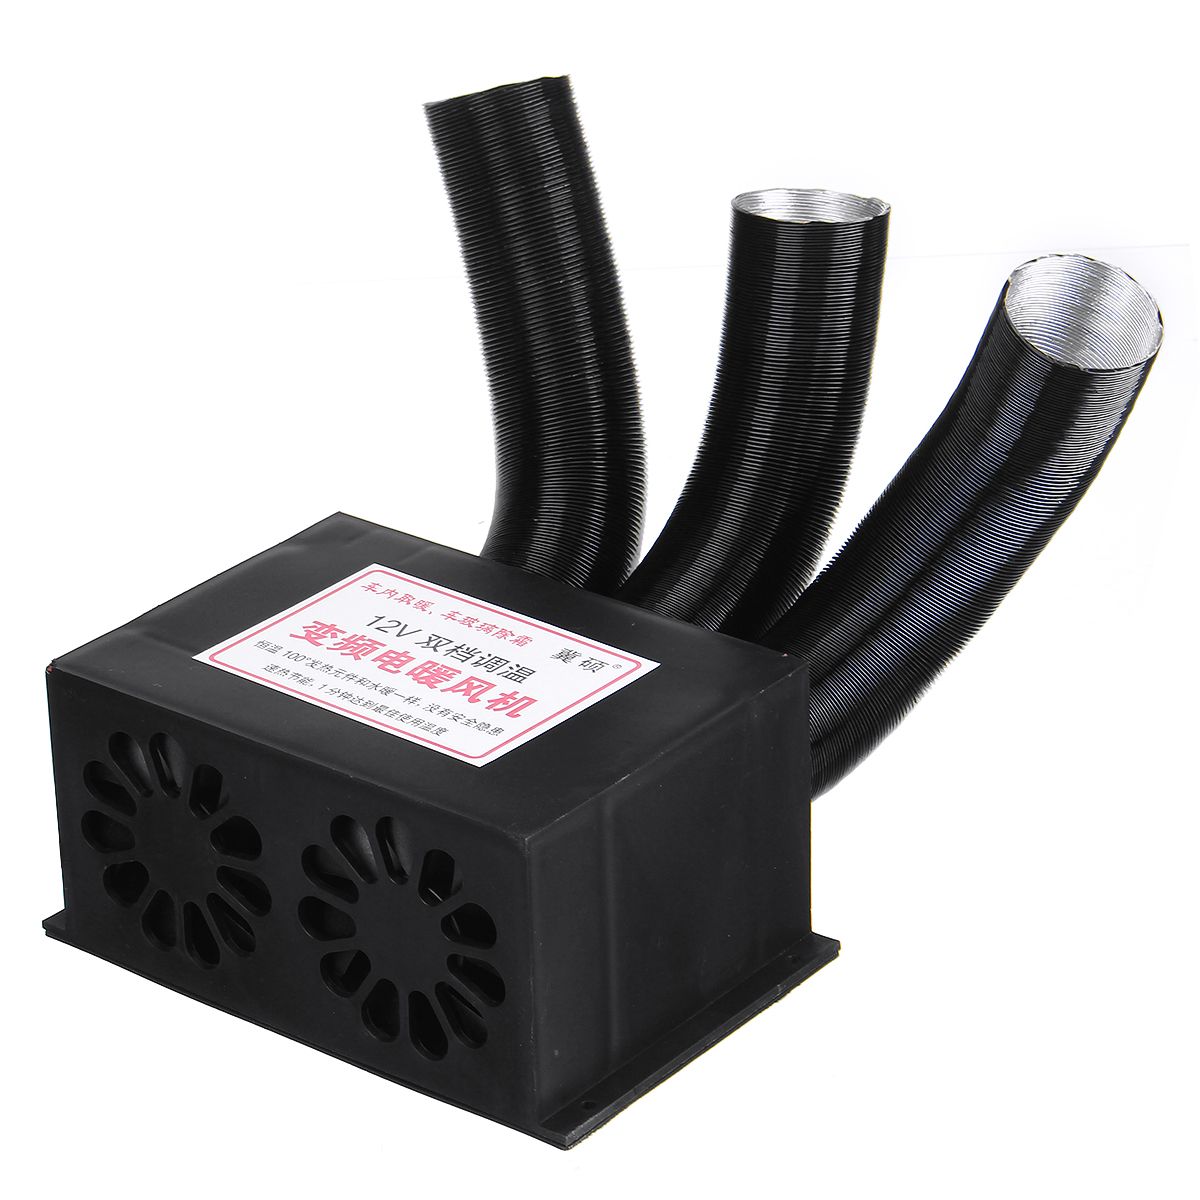 12V24V-Car-Heater-With-3-Air-Outlet-2-Big-Cooling-Fan-Maximum-About--80degC-1612707